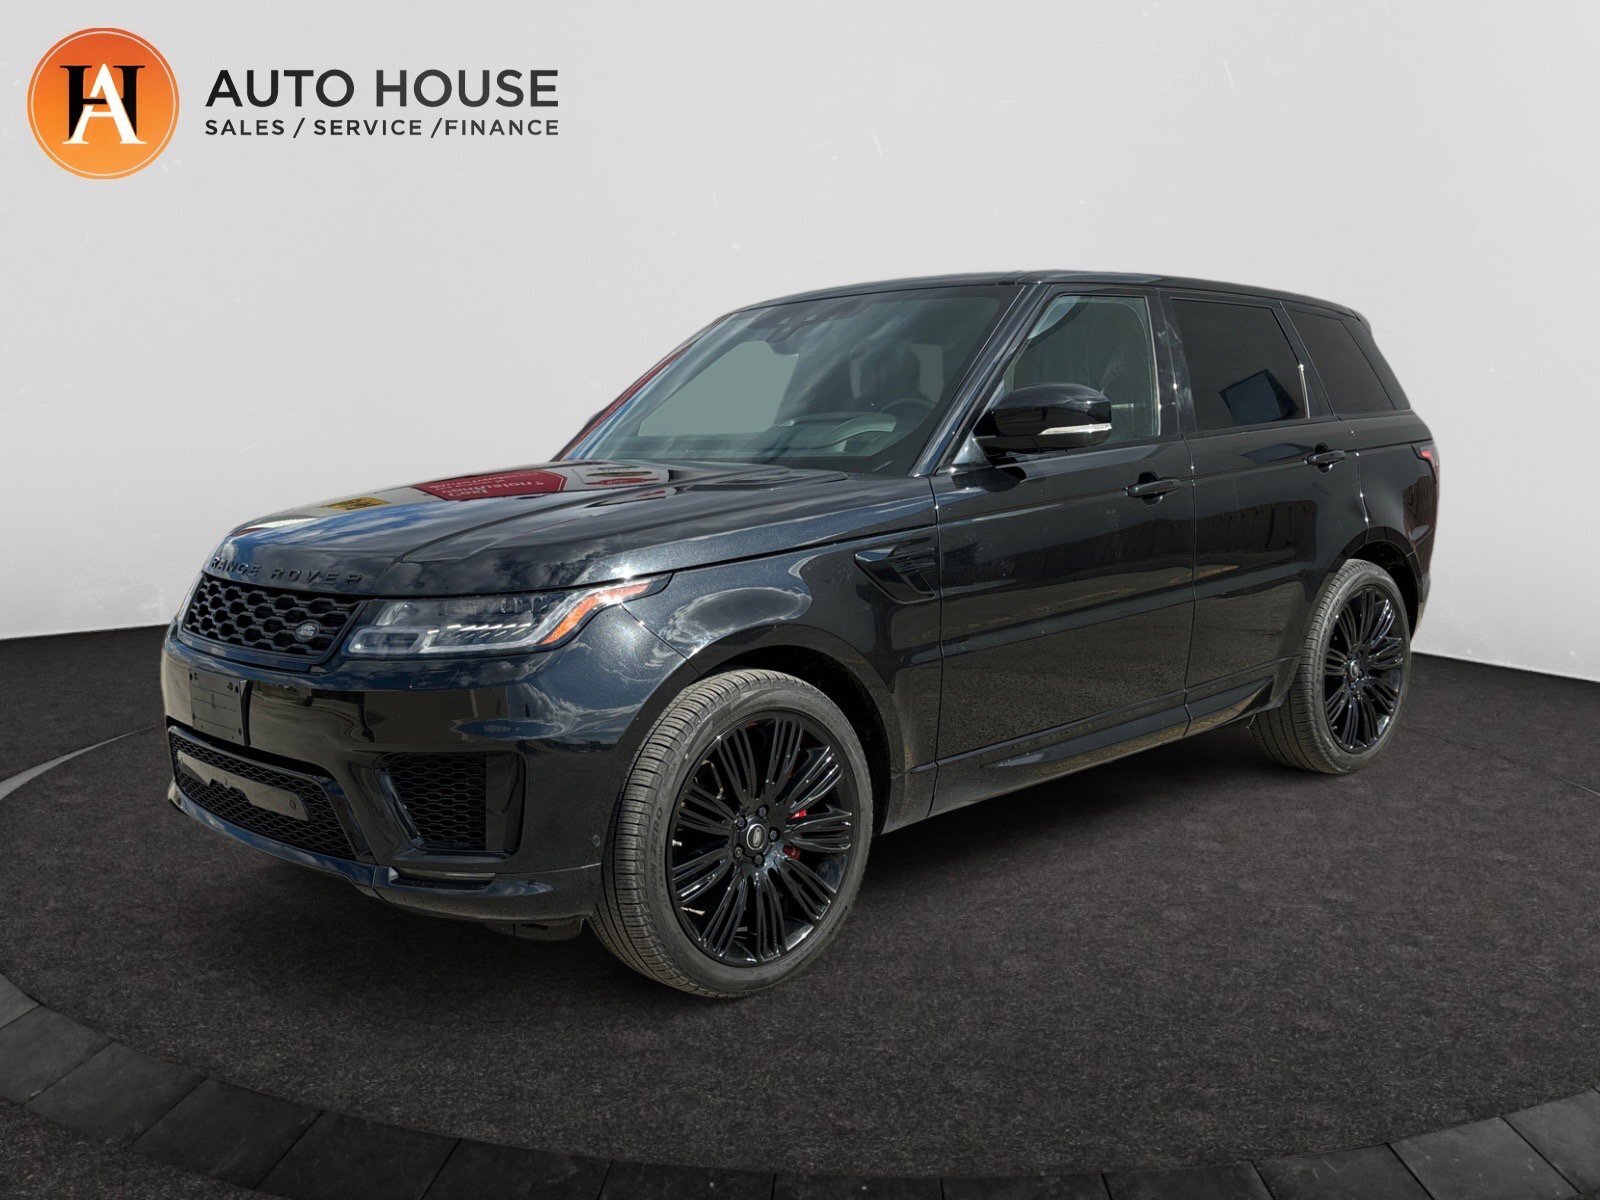 2020 Land Rover Range Rover Sport HSE DYNAMIC | NAVIGATION | PANO SUNROOF